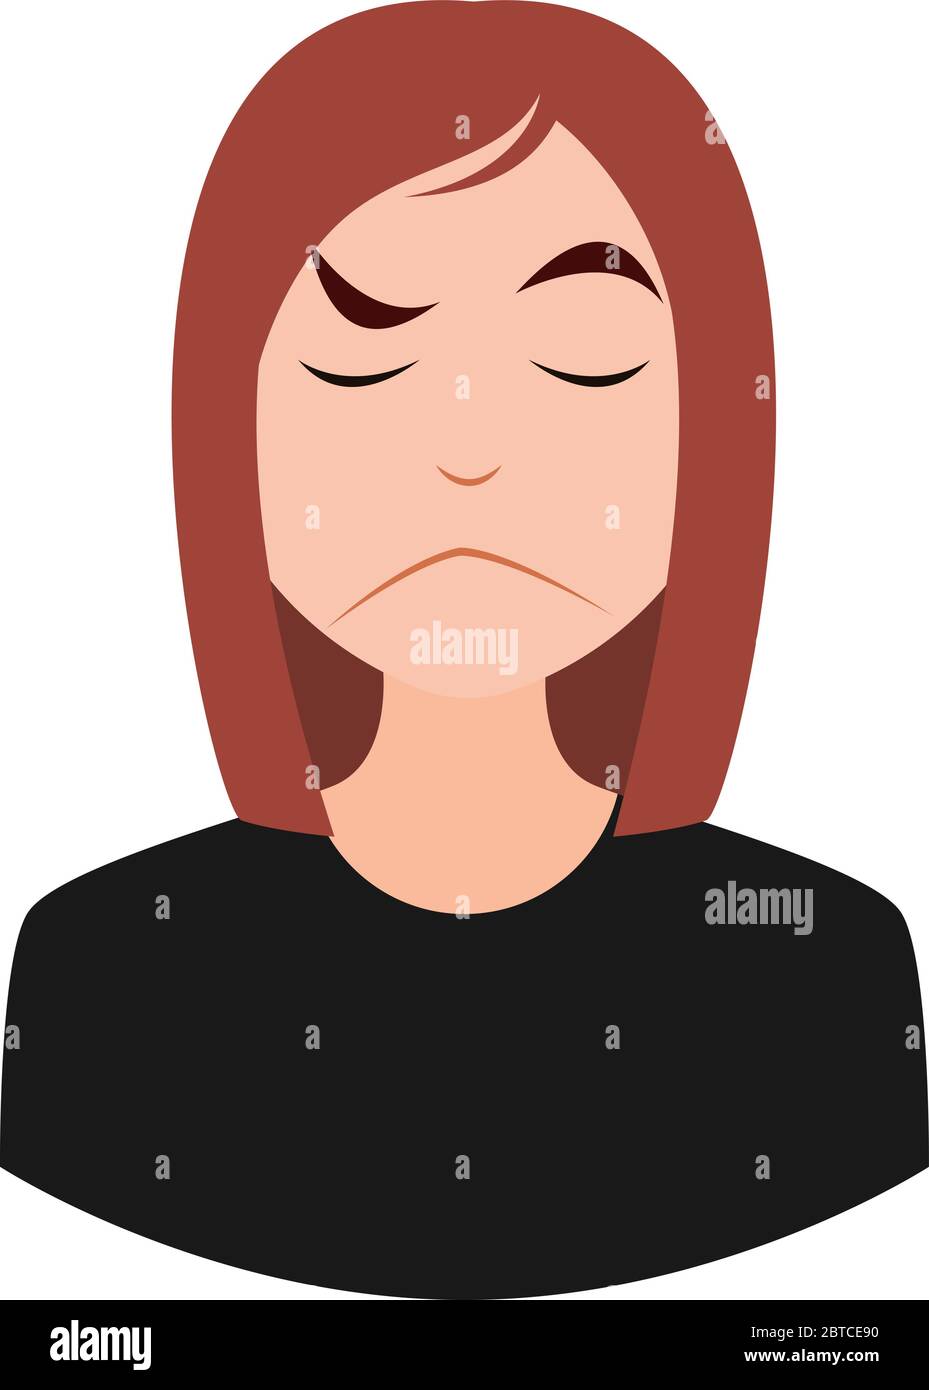 Angry woman, illustration, vector on white background Stock Vector